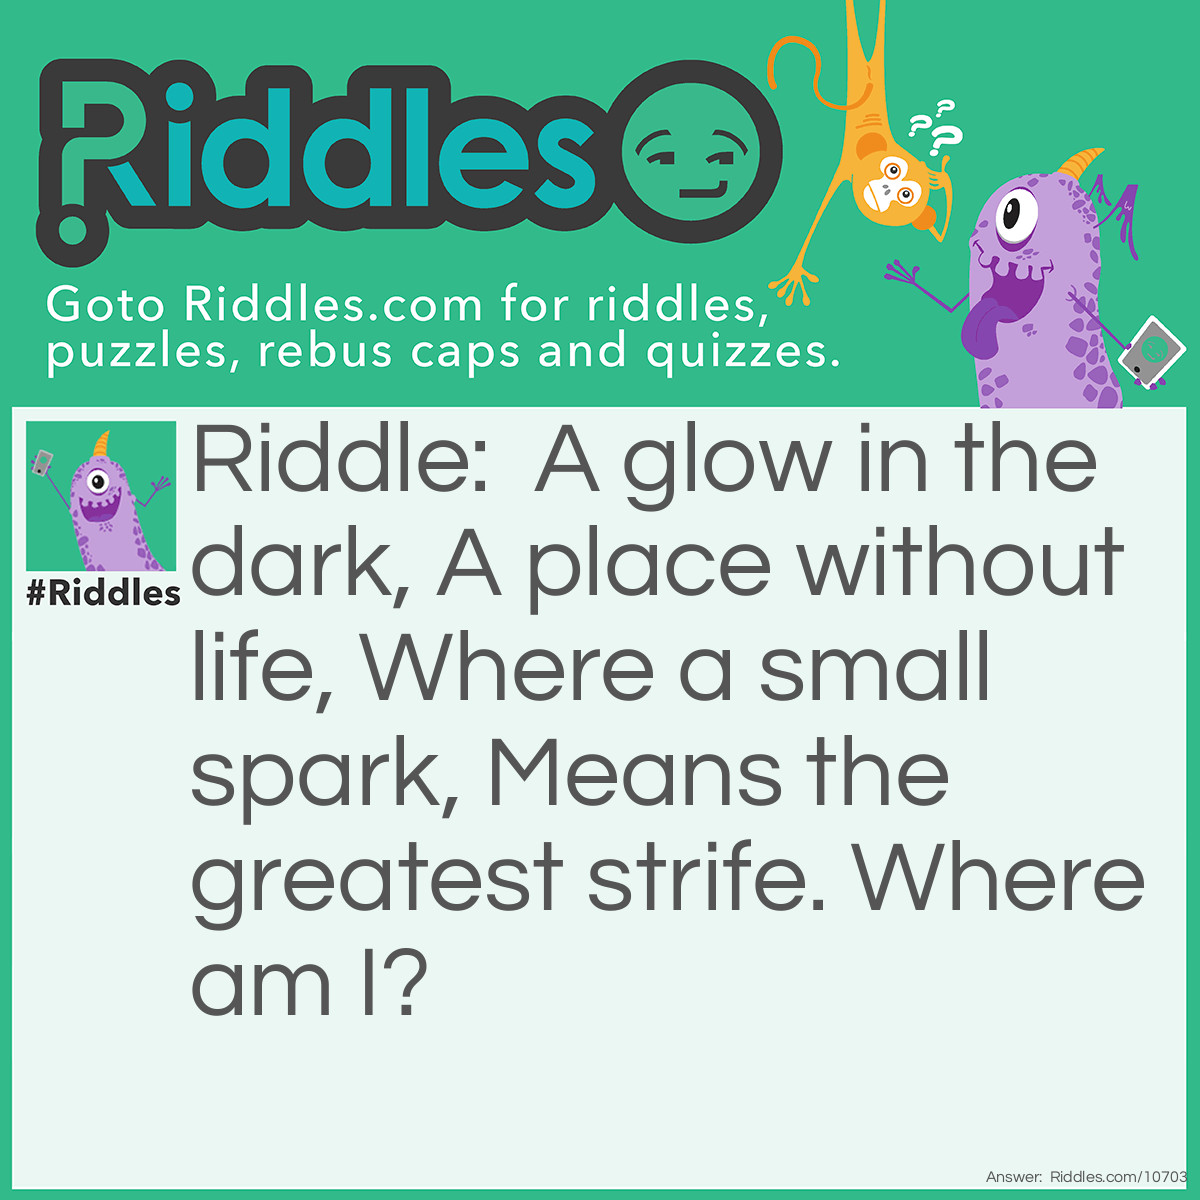 Riddle: A glow in the dark, A place without life, Where a small spark, Means the greatest strife. Where am I? Answer: Space.